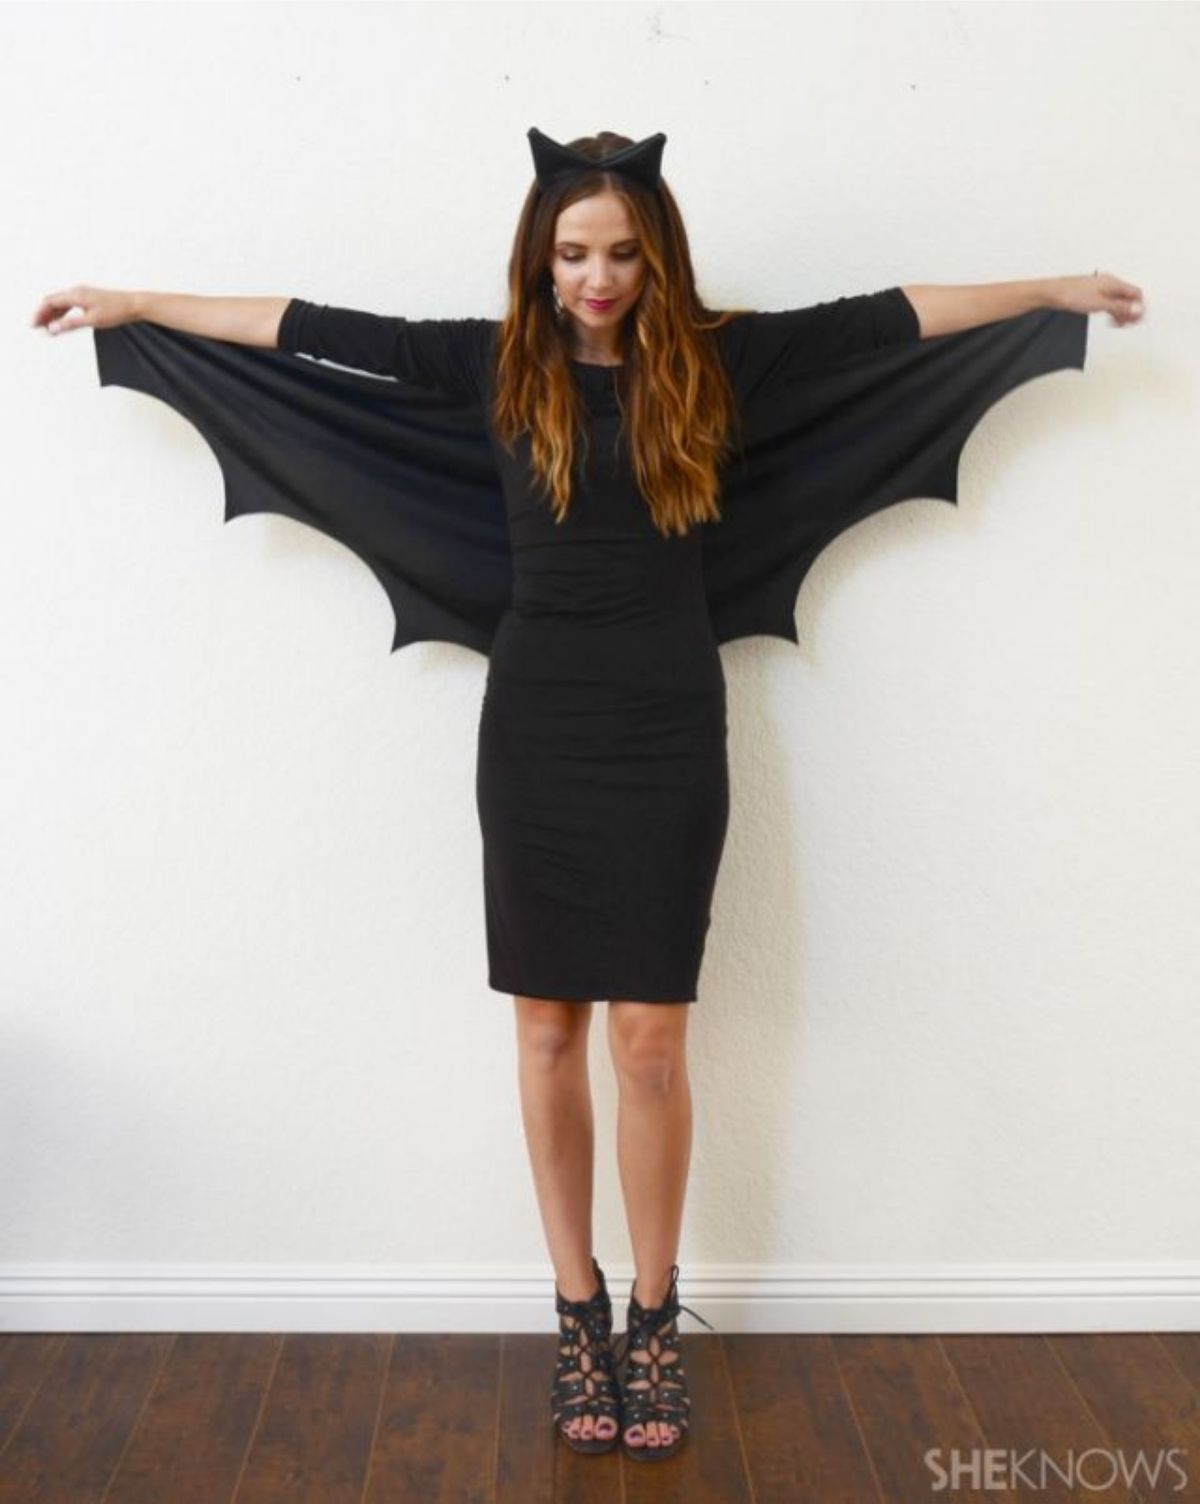 DIY bat costume from She Knows blog